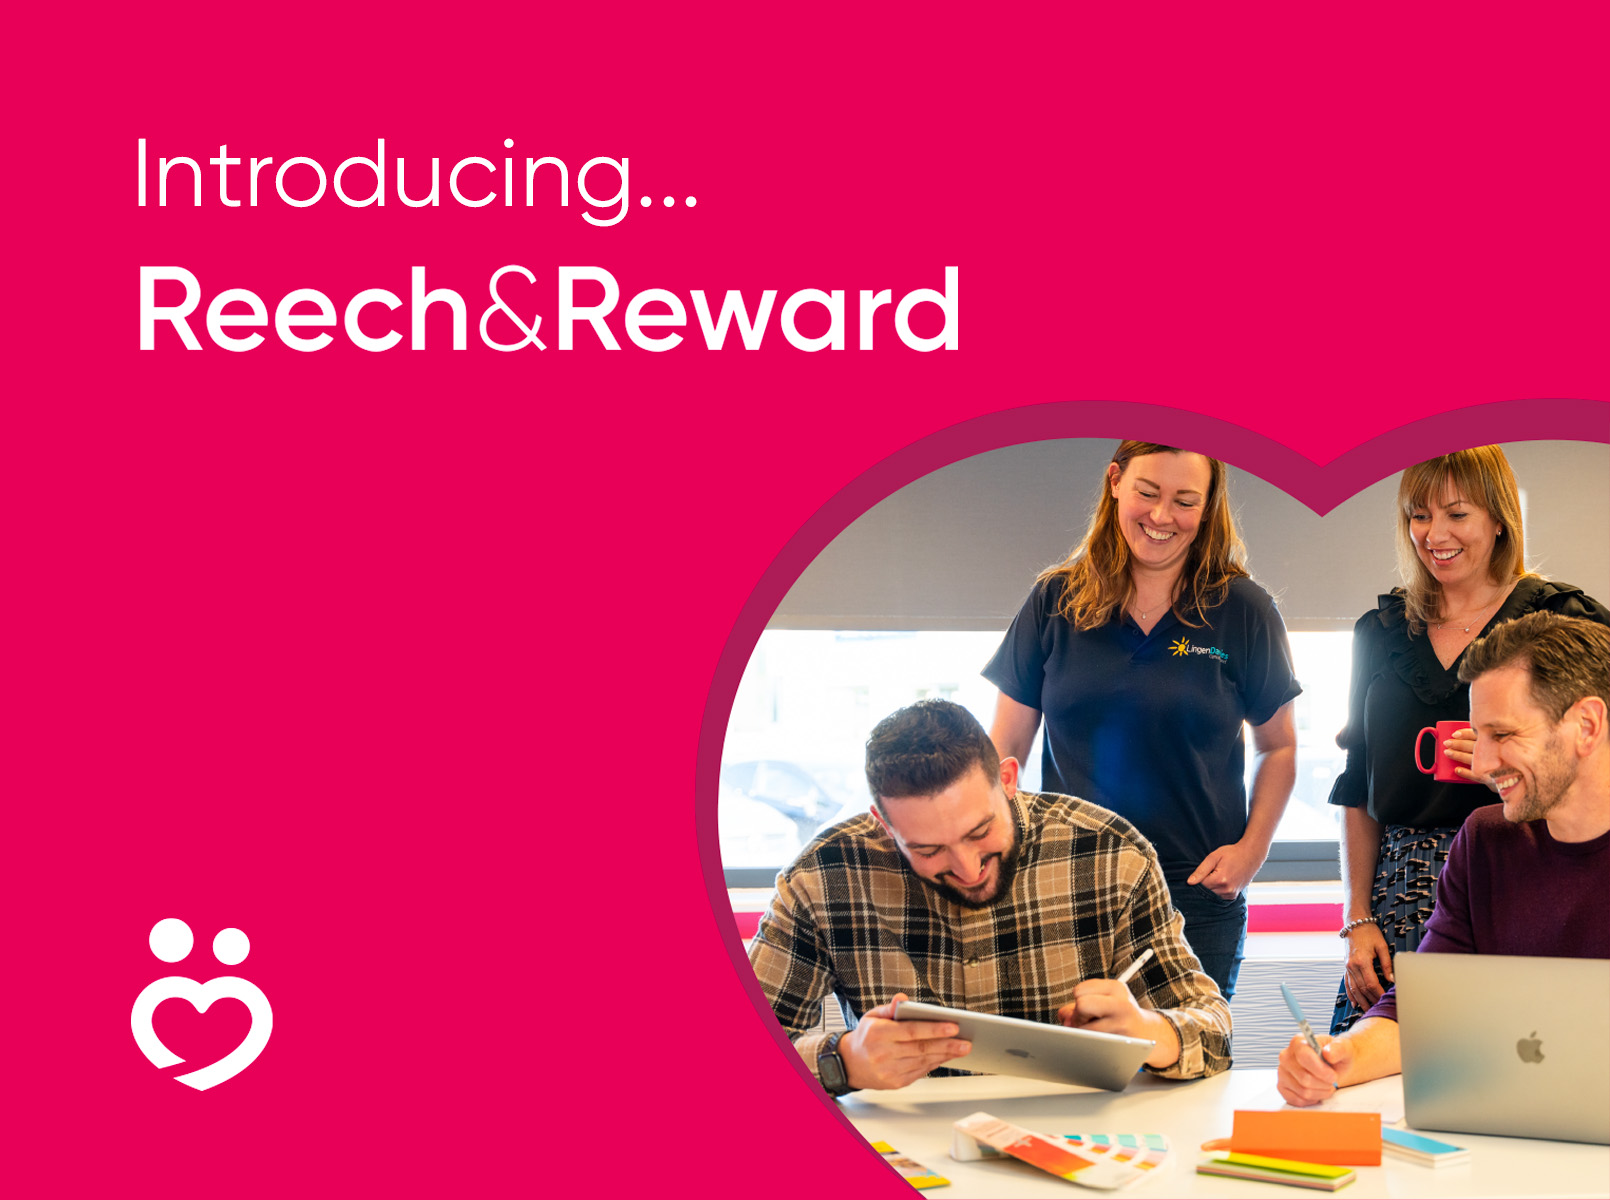 Introducing Reech&Reward, our Charity of the Year initiative!